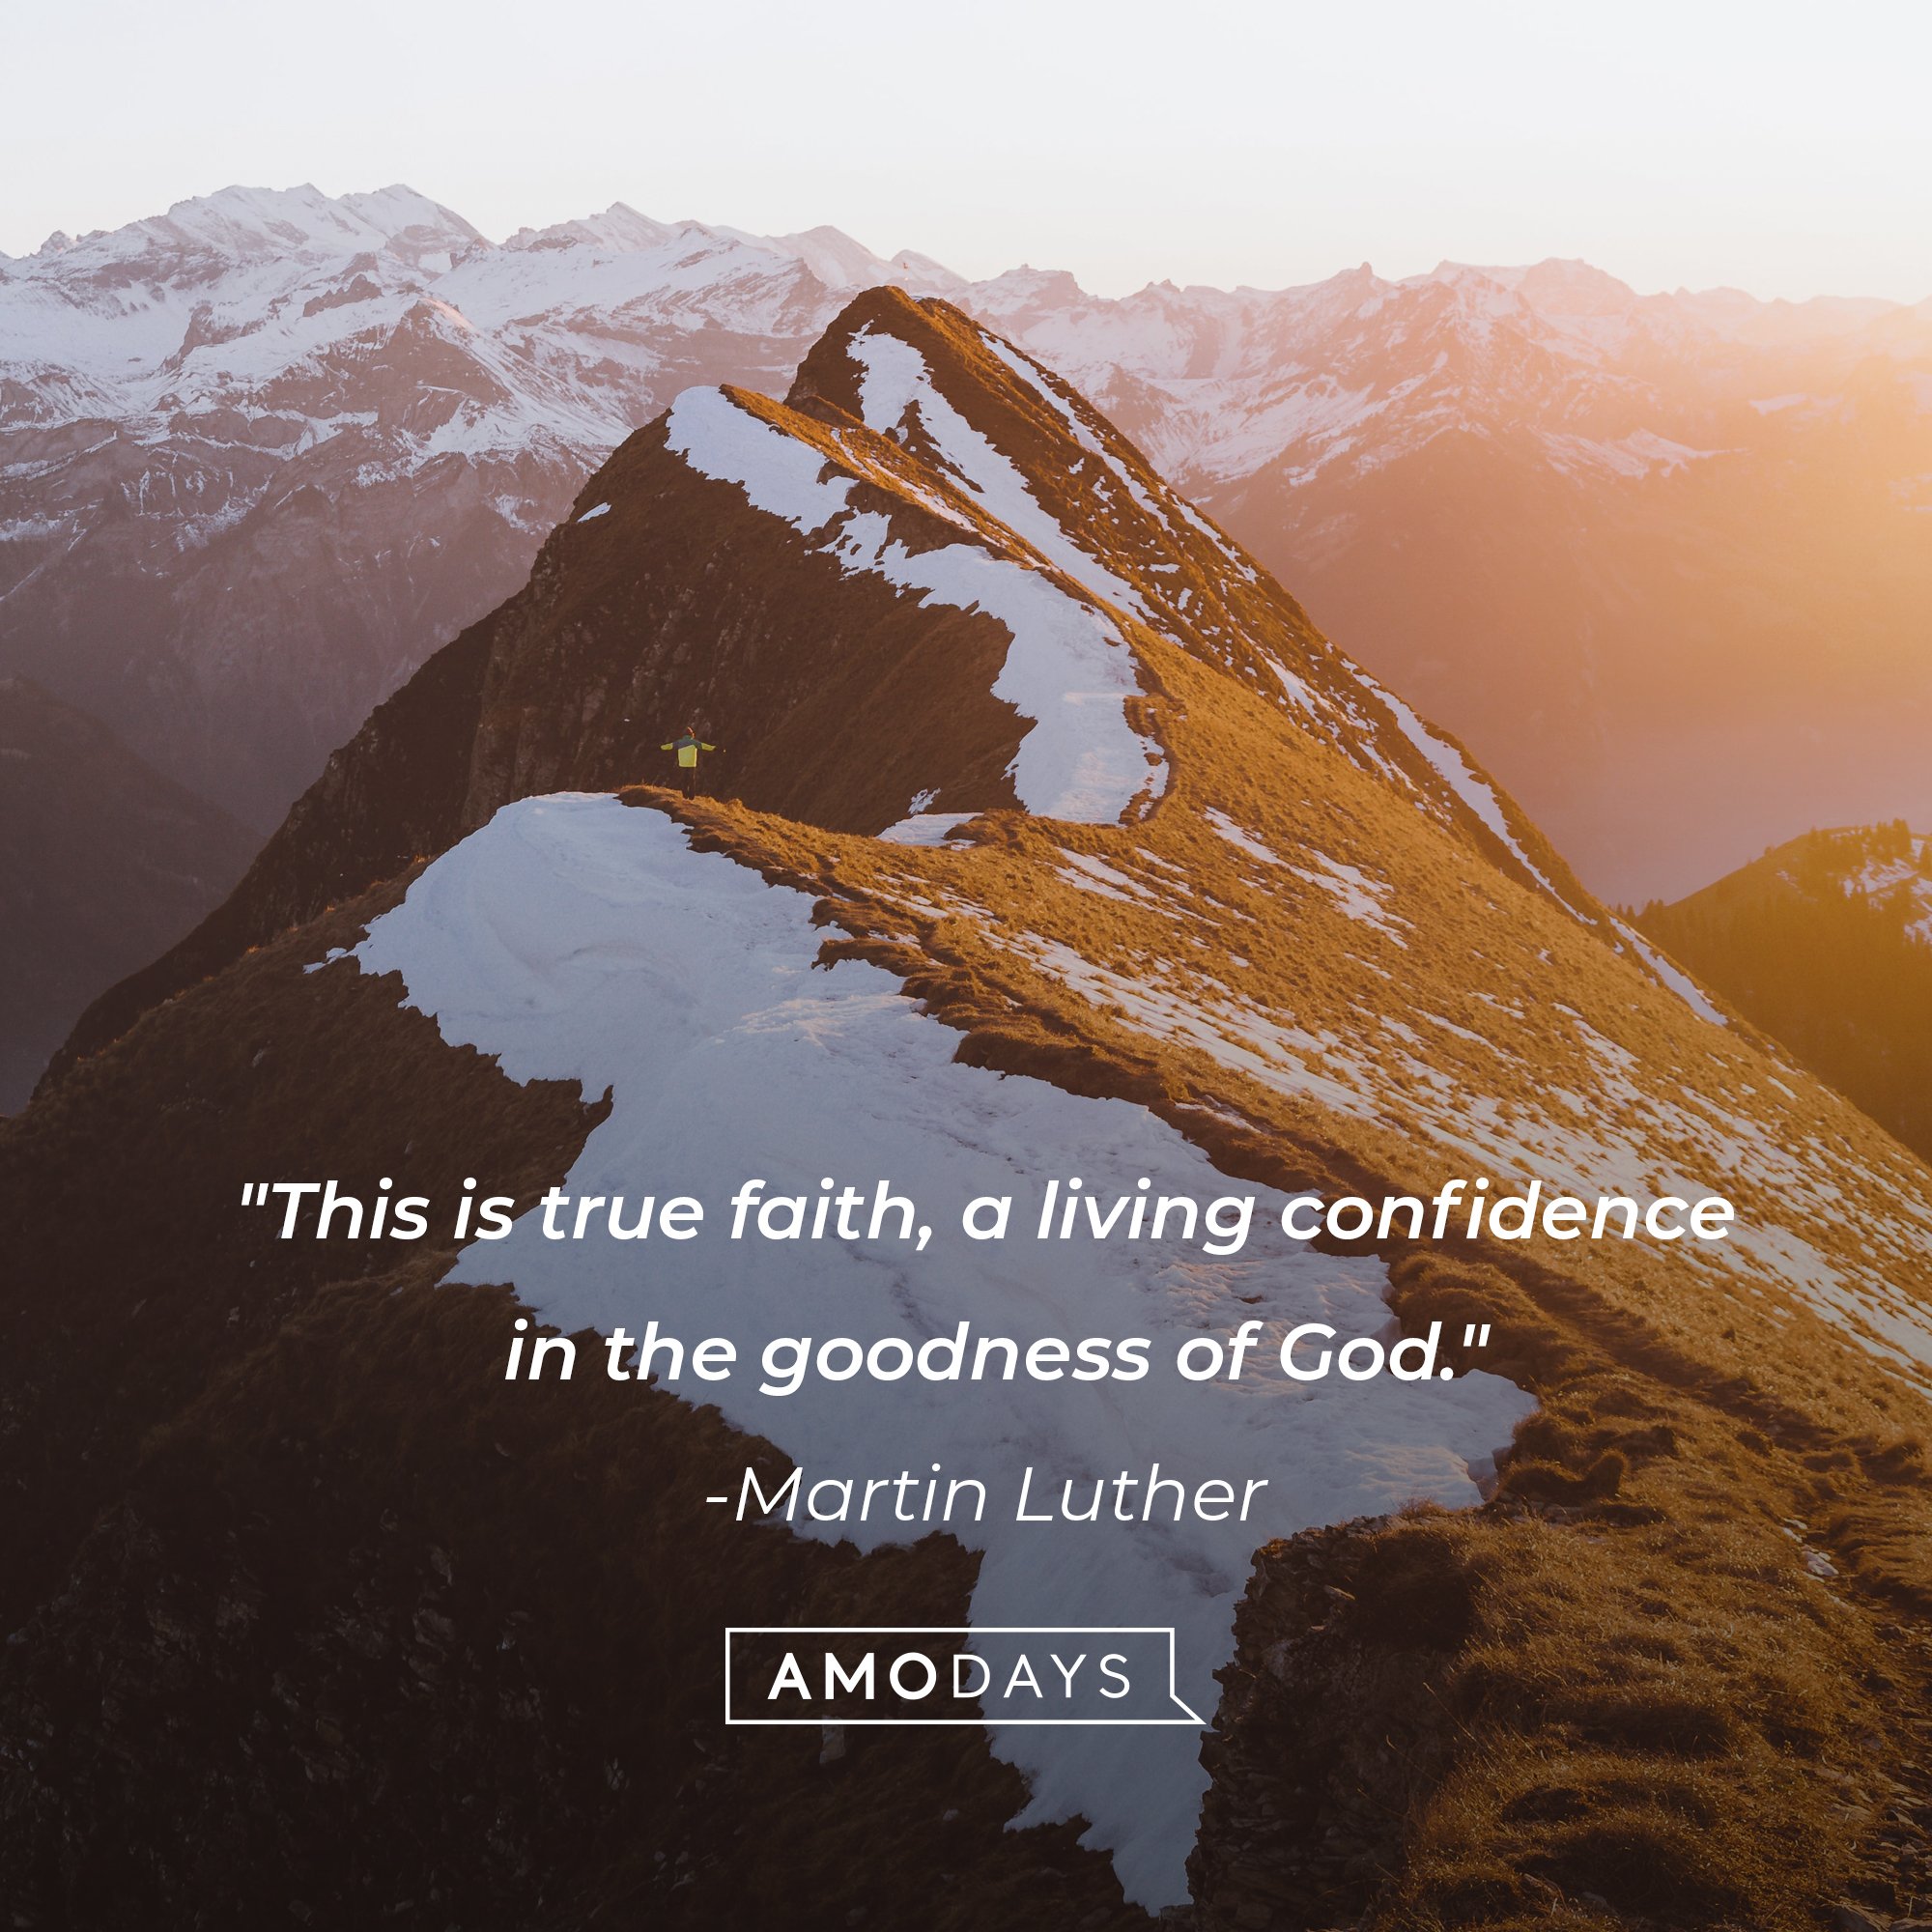 Martin Luther’s quote: “This is true faith, a living confidence in the goodness of God.” | Image: AmoDays